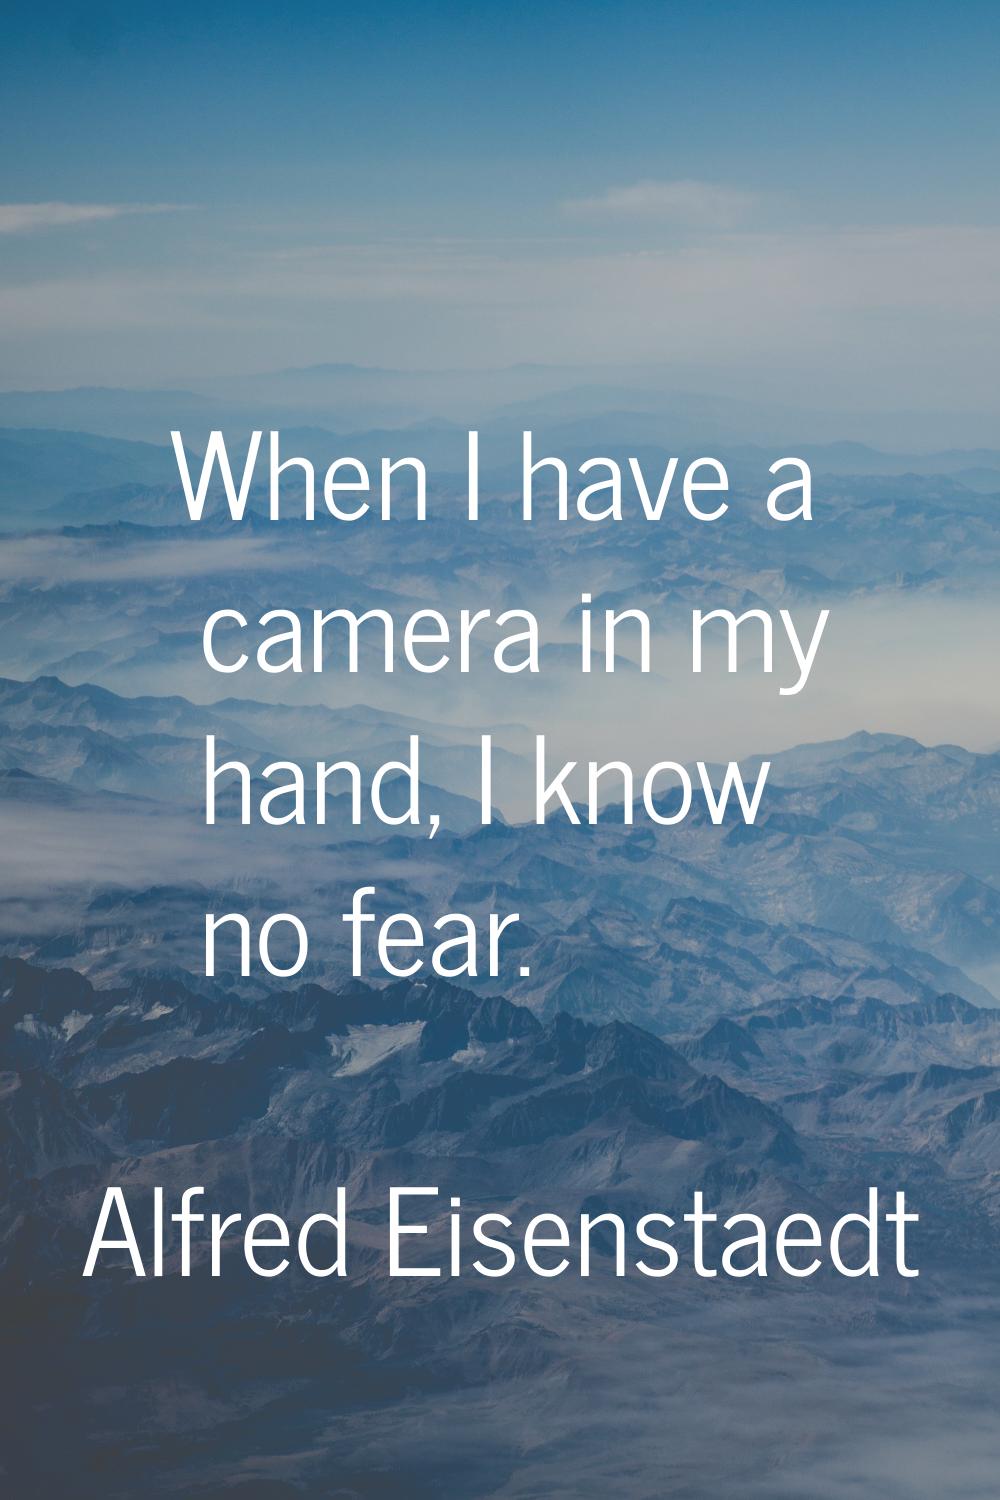 When I have a camera in my hand, I know no fear.